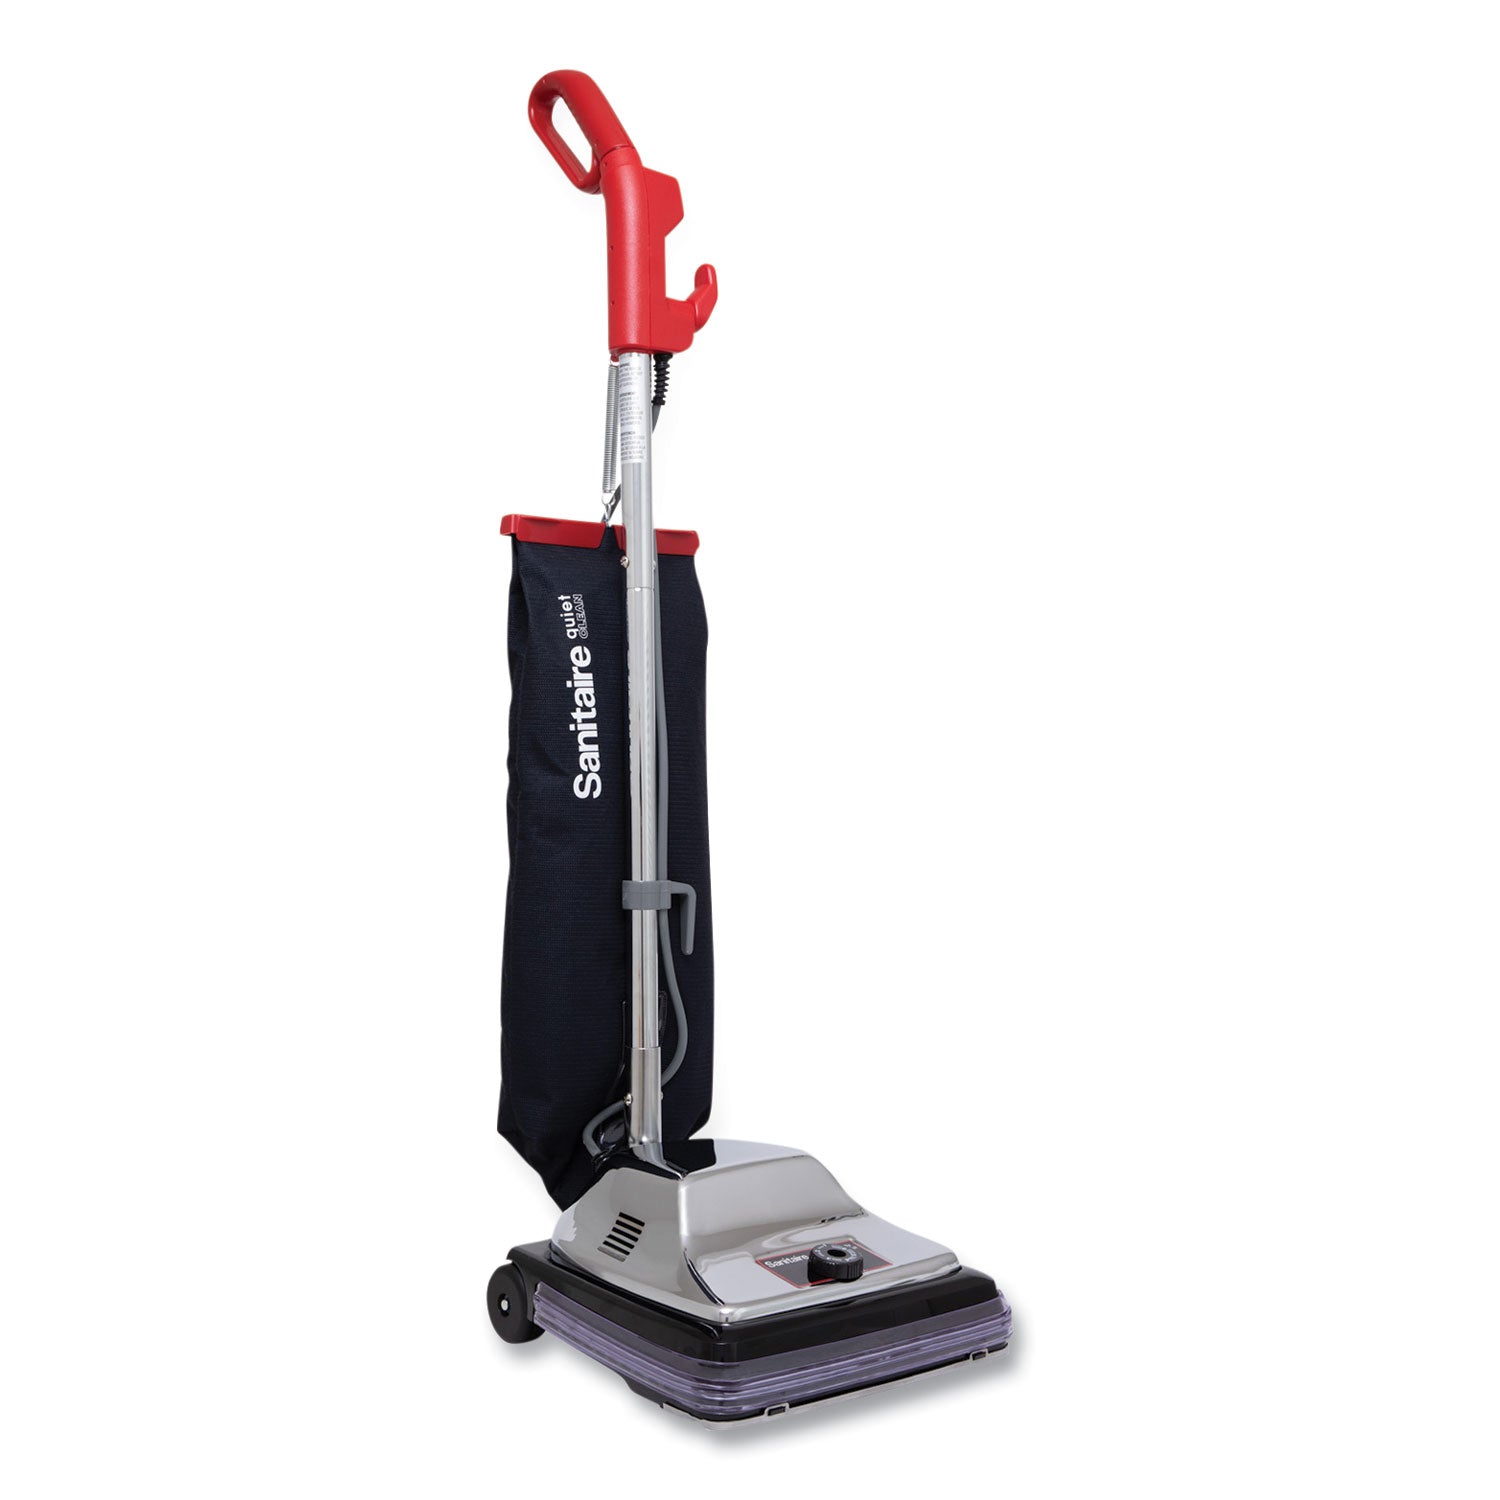 tradition-quietclean-upright-vacuum-sc889a-12-cleaning-path-gray-red-black_eursc889d - 1